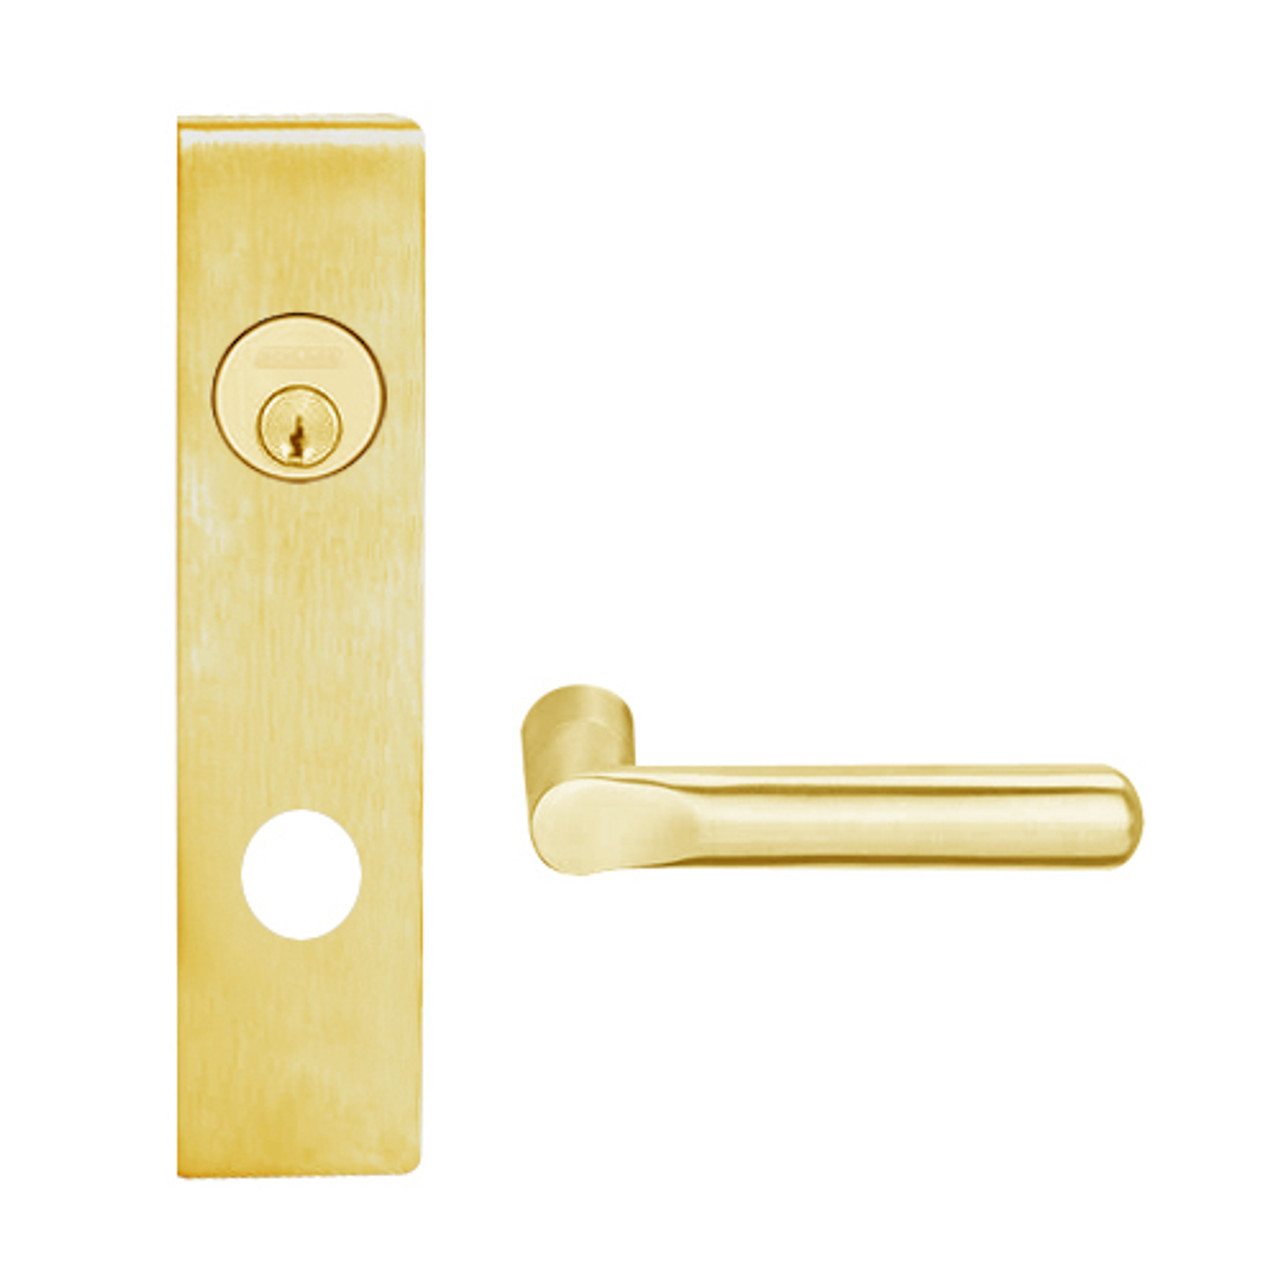 L9456L-18L-605 Schlage L Series Less Cylinder Corridor with Deadbolt Commercial Mortise Lock with 18 Cast Lever Design in Bright Brass